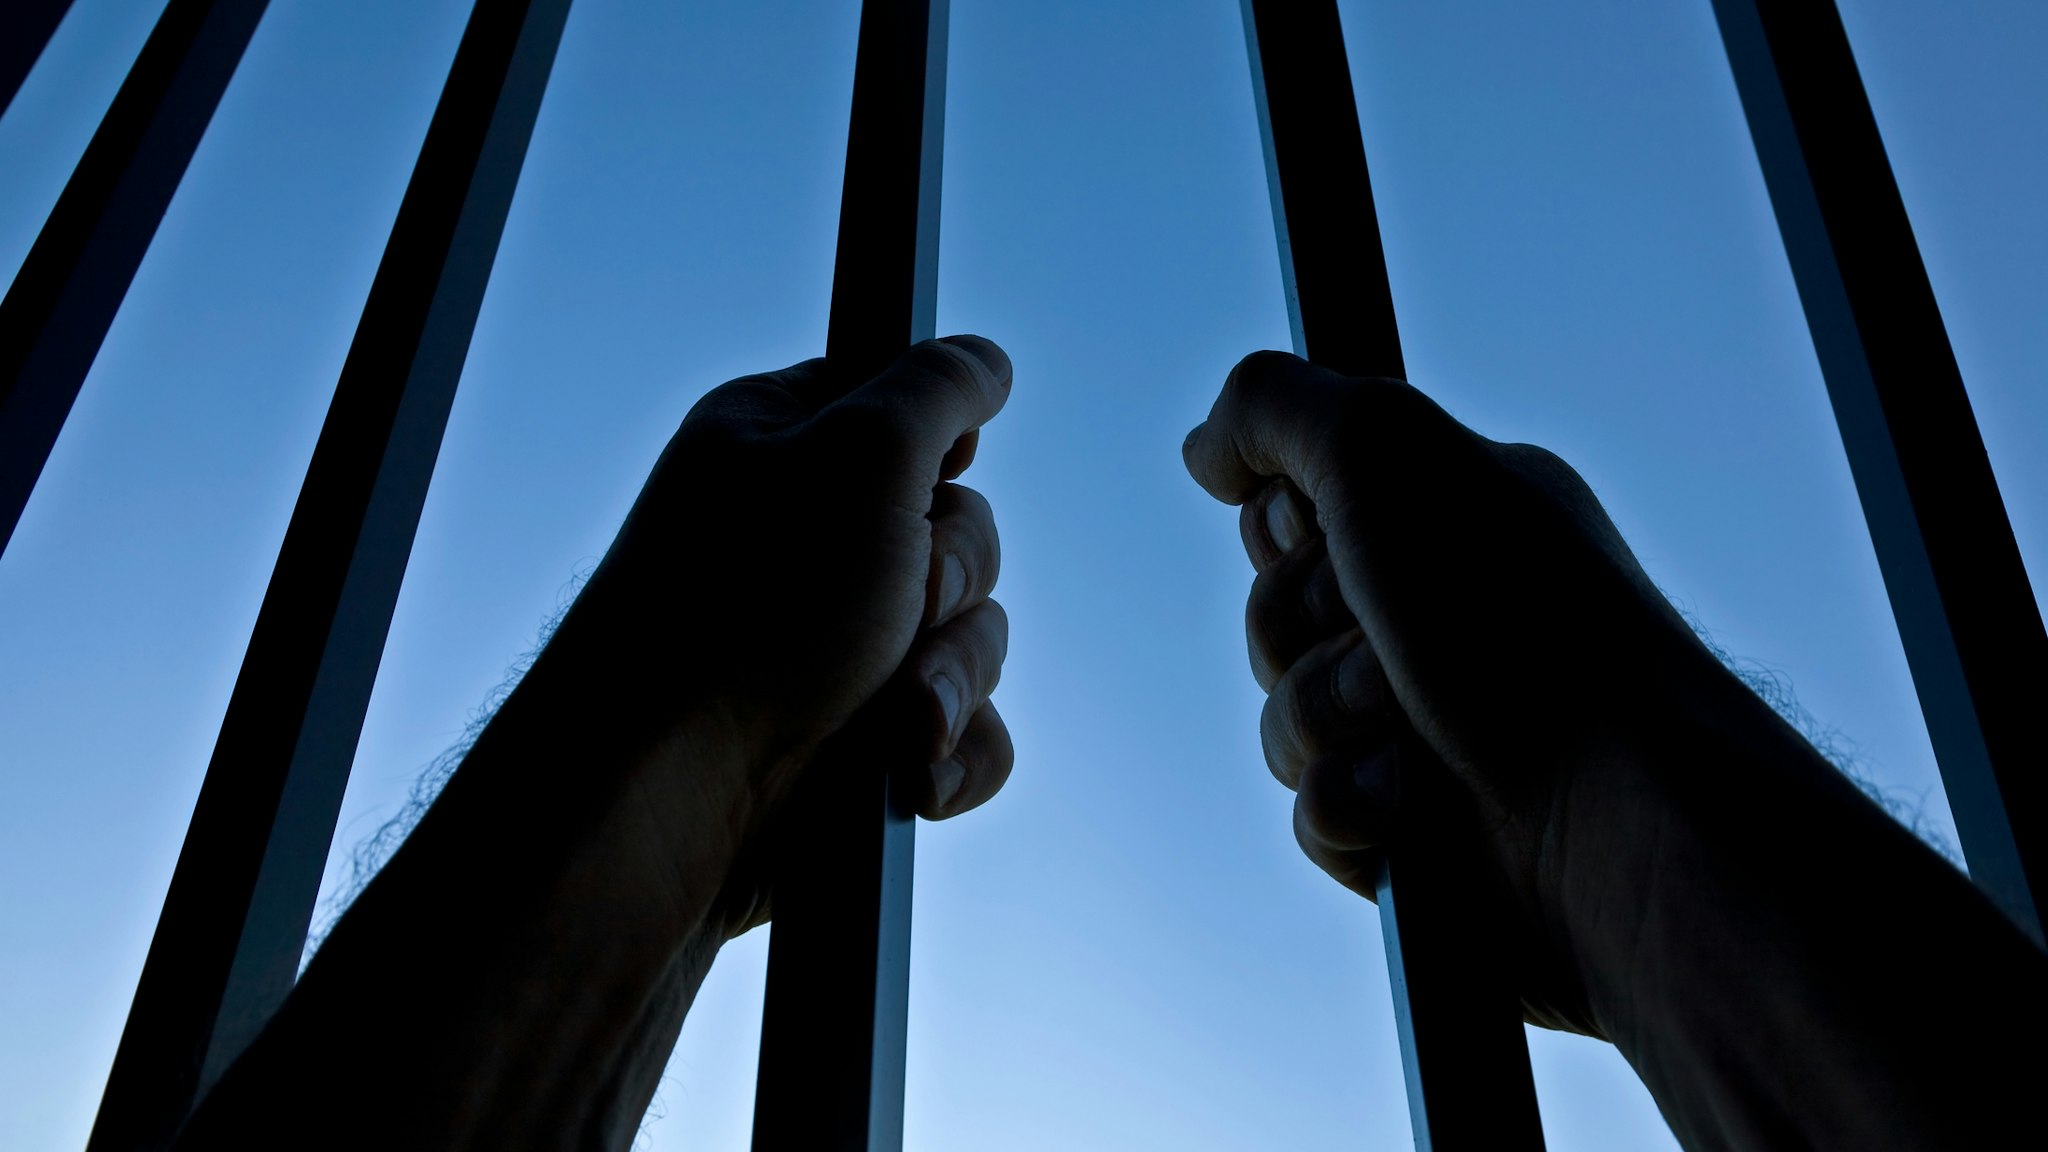 Silhouette of Hands Behind Jail Bars Against Clear Blue Sky - stock photo